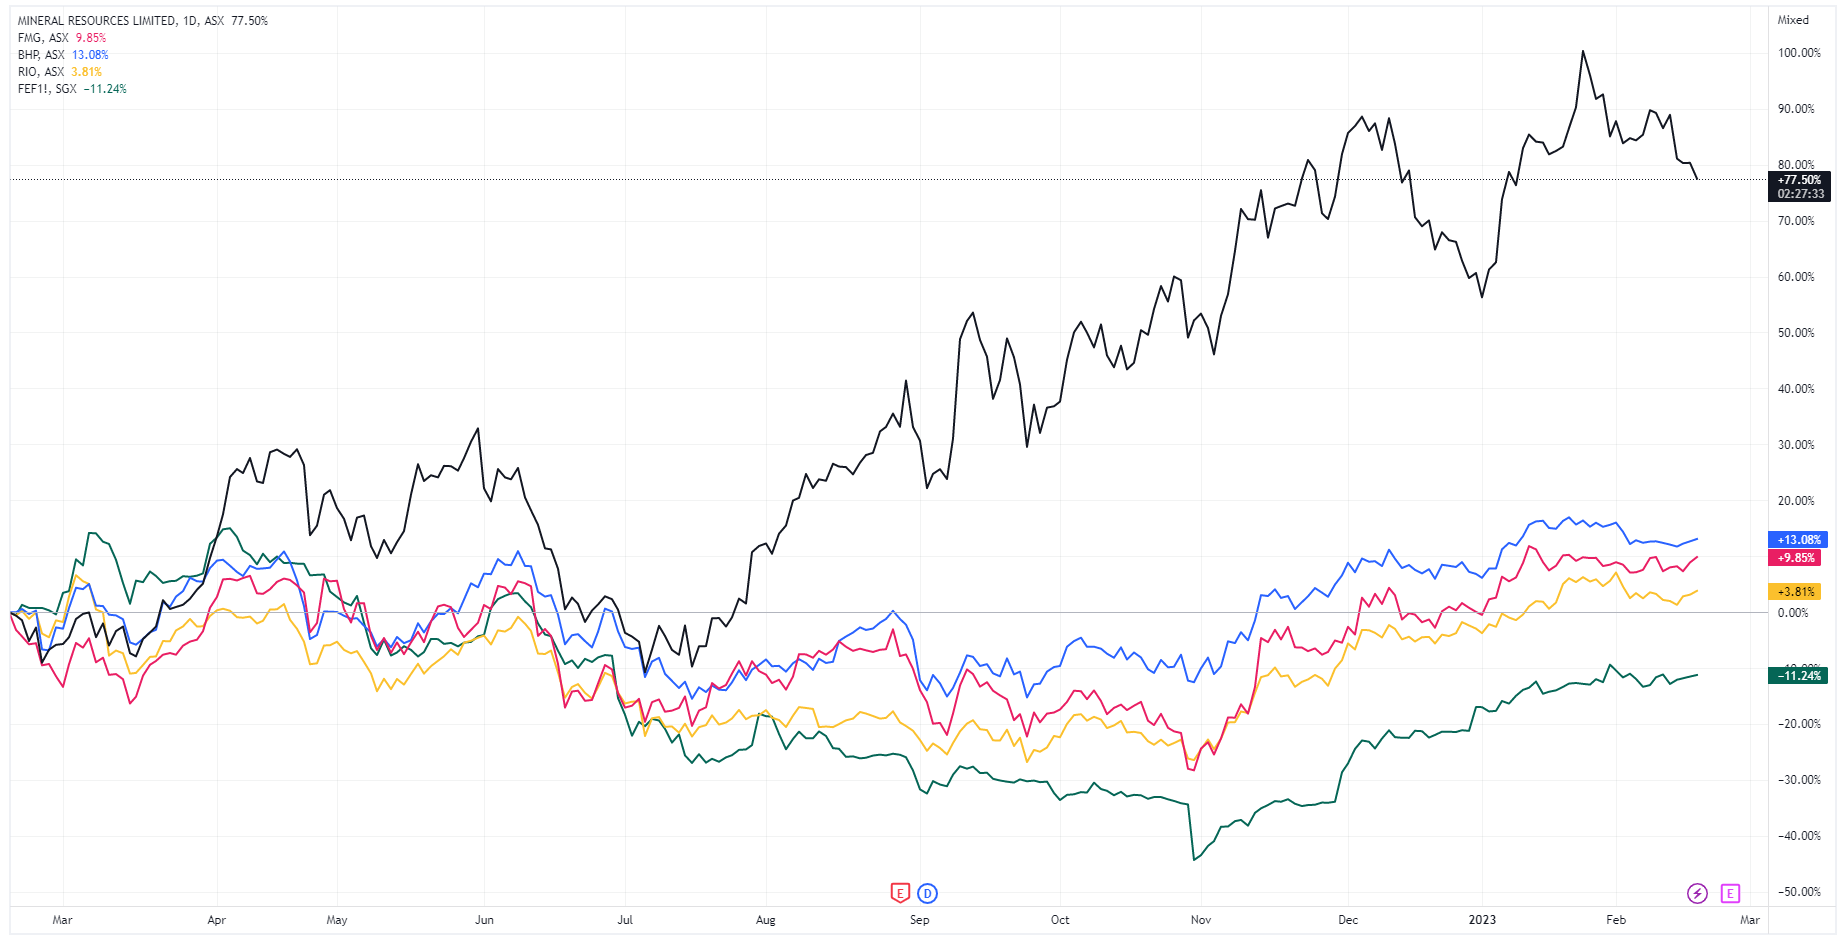 Mineral Resources (Black), Fortescue (Red), BHP (Blue), Rio Tinto (Yellow) and Iron Ore (Green). Performance over the last 12 months (Source: TradingView)